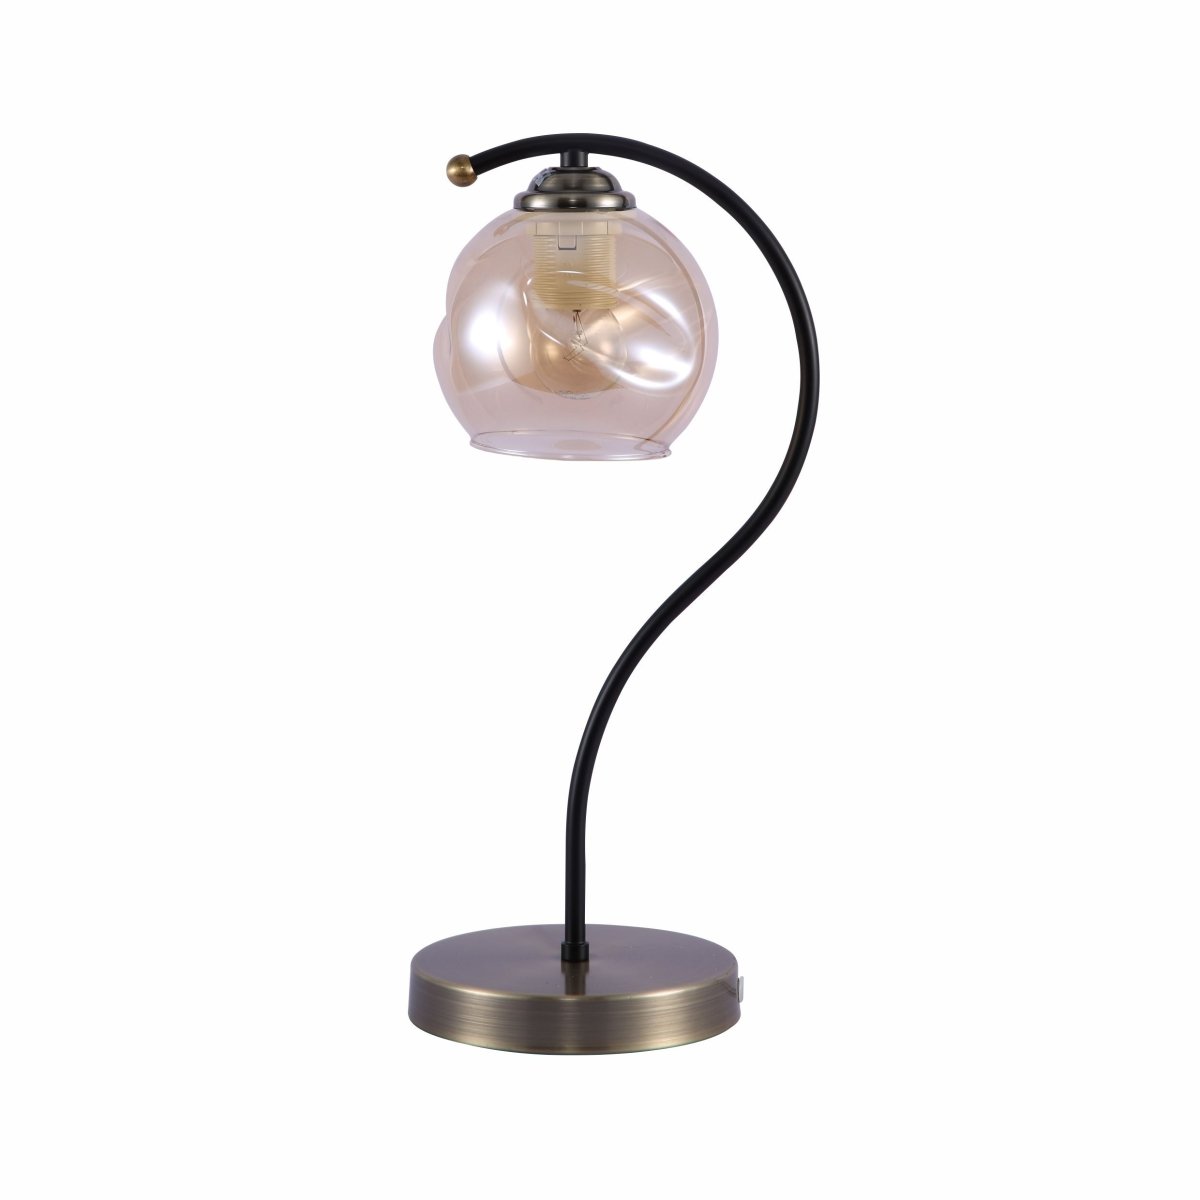 Main image of Black Antique Brass Metal Amber Globe Table Lamp with E27 Fitting | TEKLED 151-19686